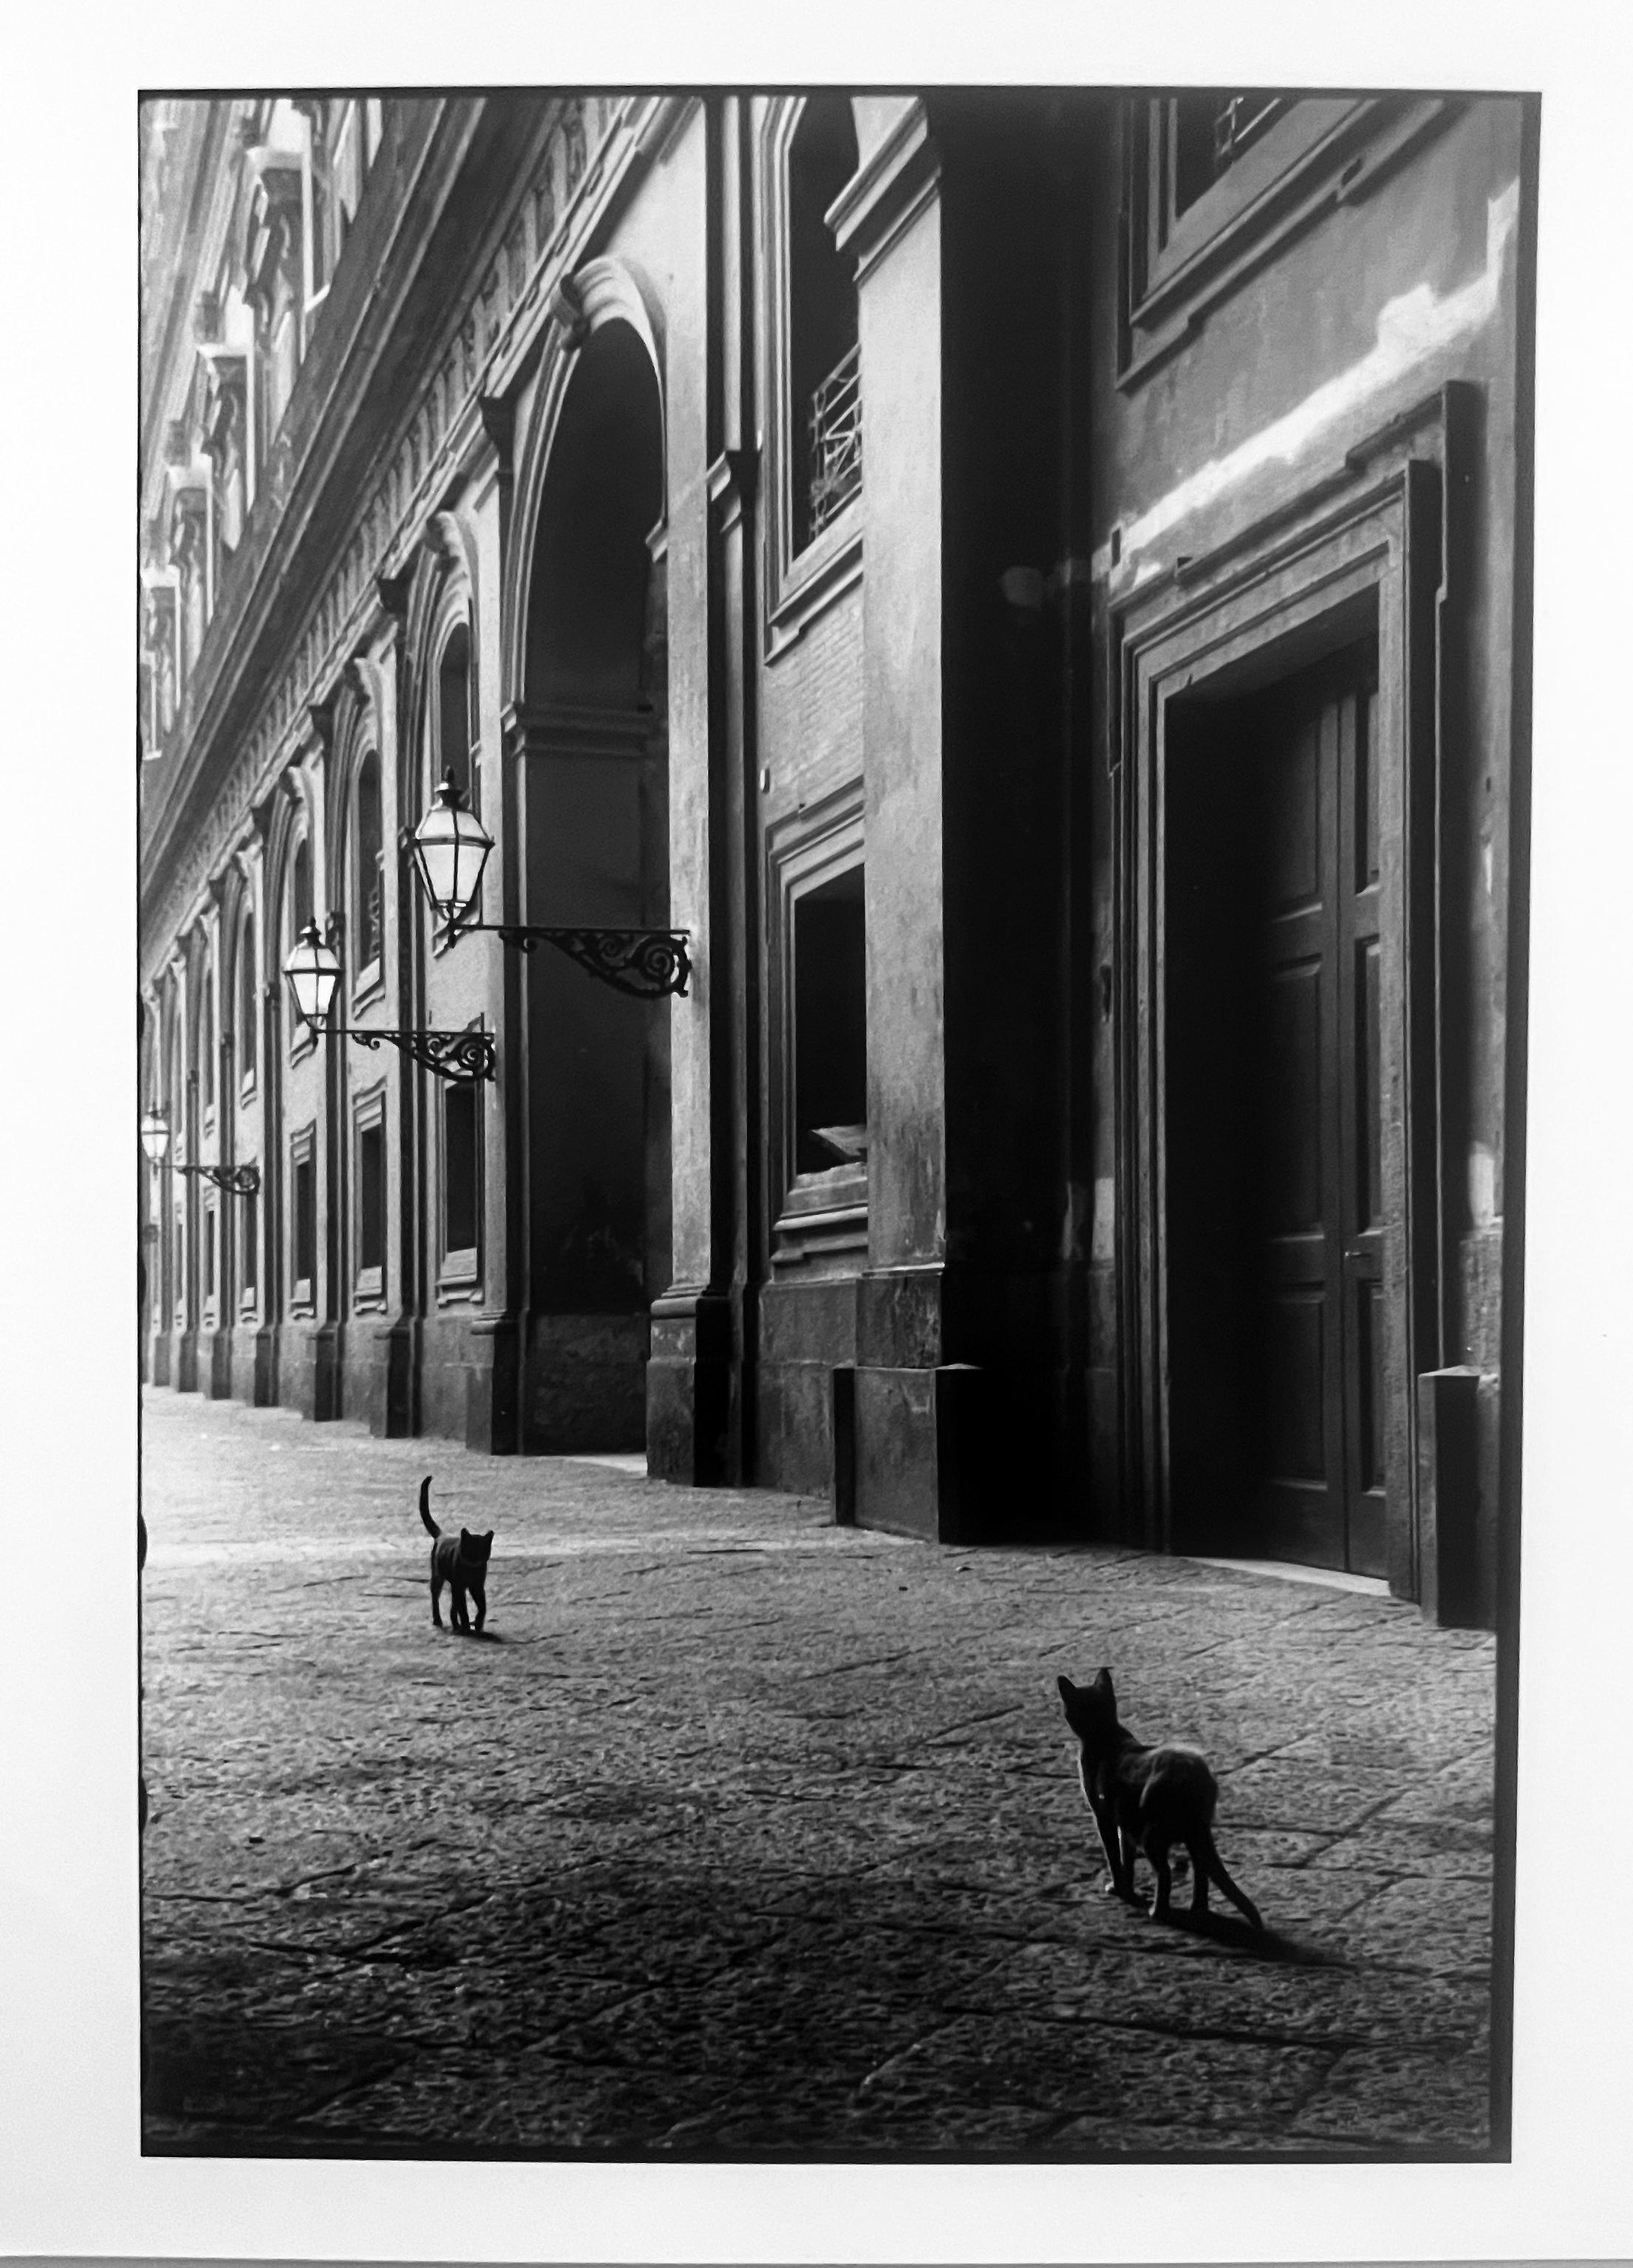 Black and White Photograph Leonard Freed - Cats, Naples, Italy, Black and White Street Photography 1950s